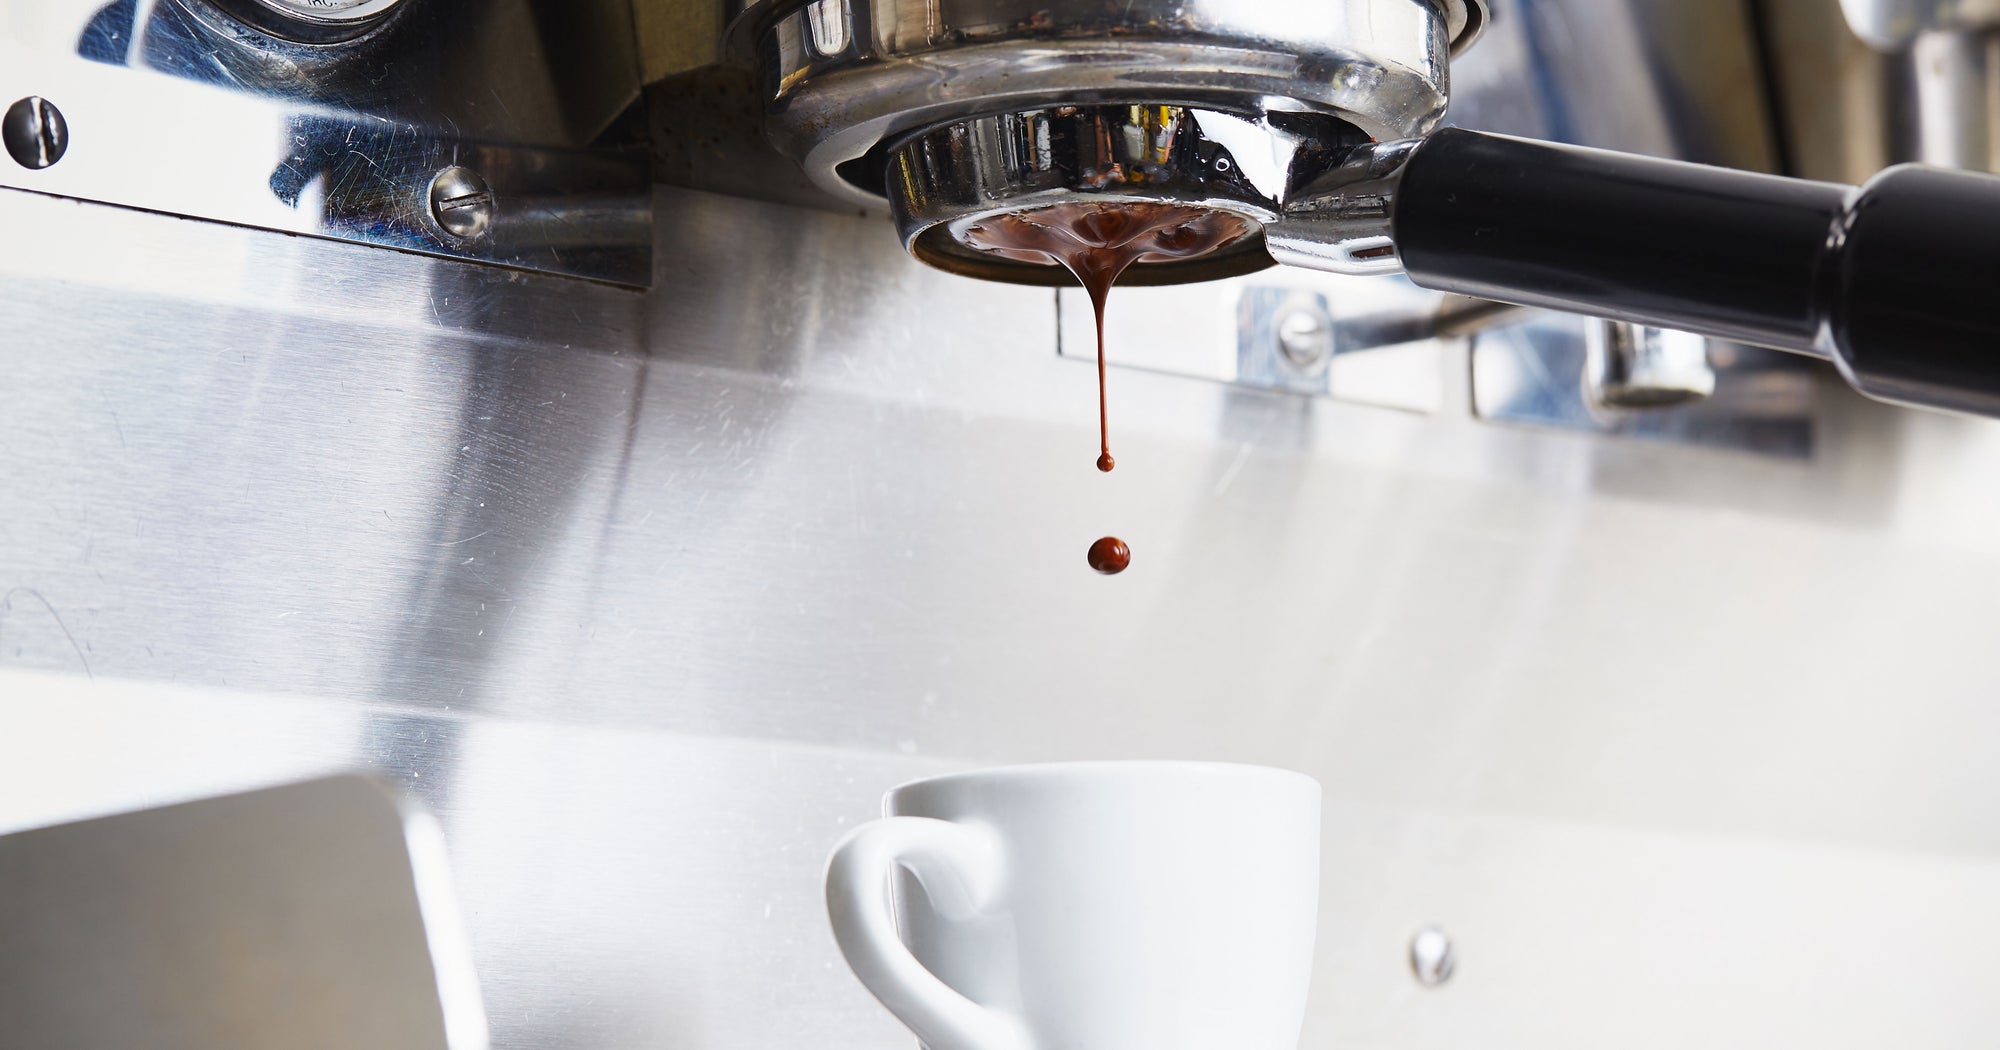 espresso being extracted from a bottomless portafilter into a white demitasse